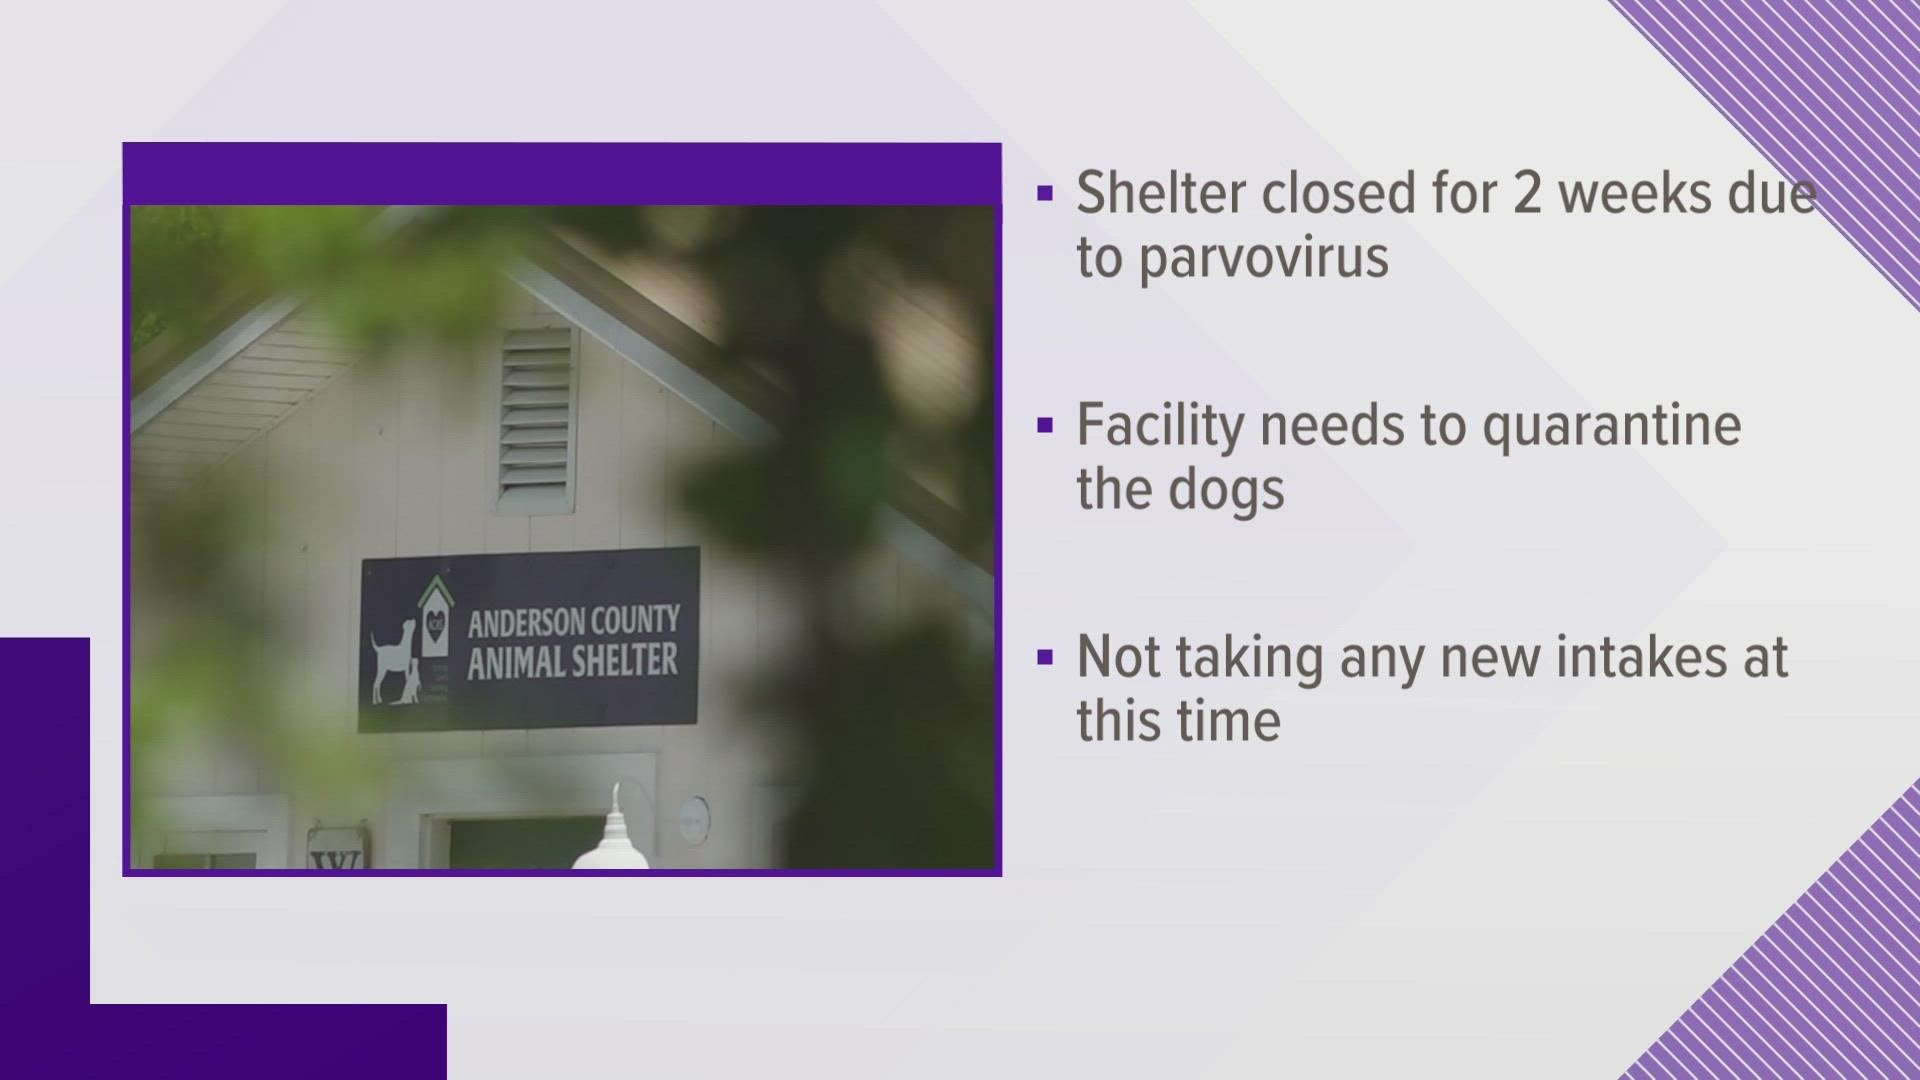 The animal shelter said they are too small for a quarantine area and they will monitor the health of their animal population.